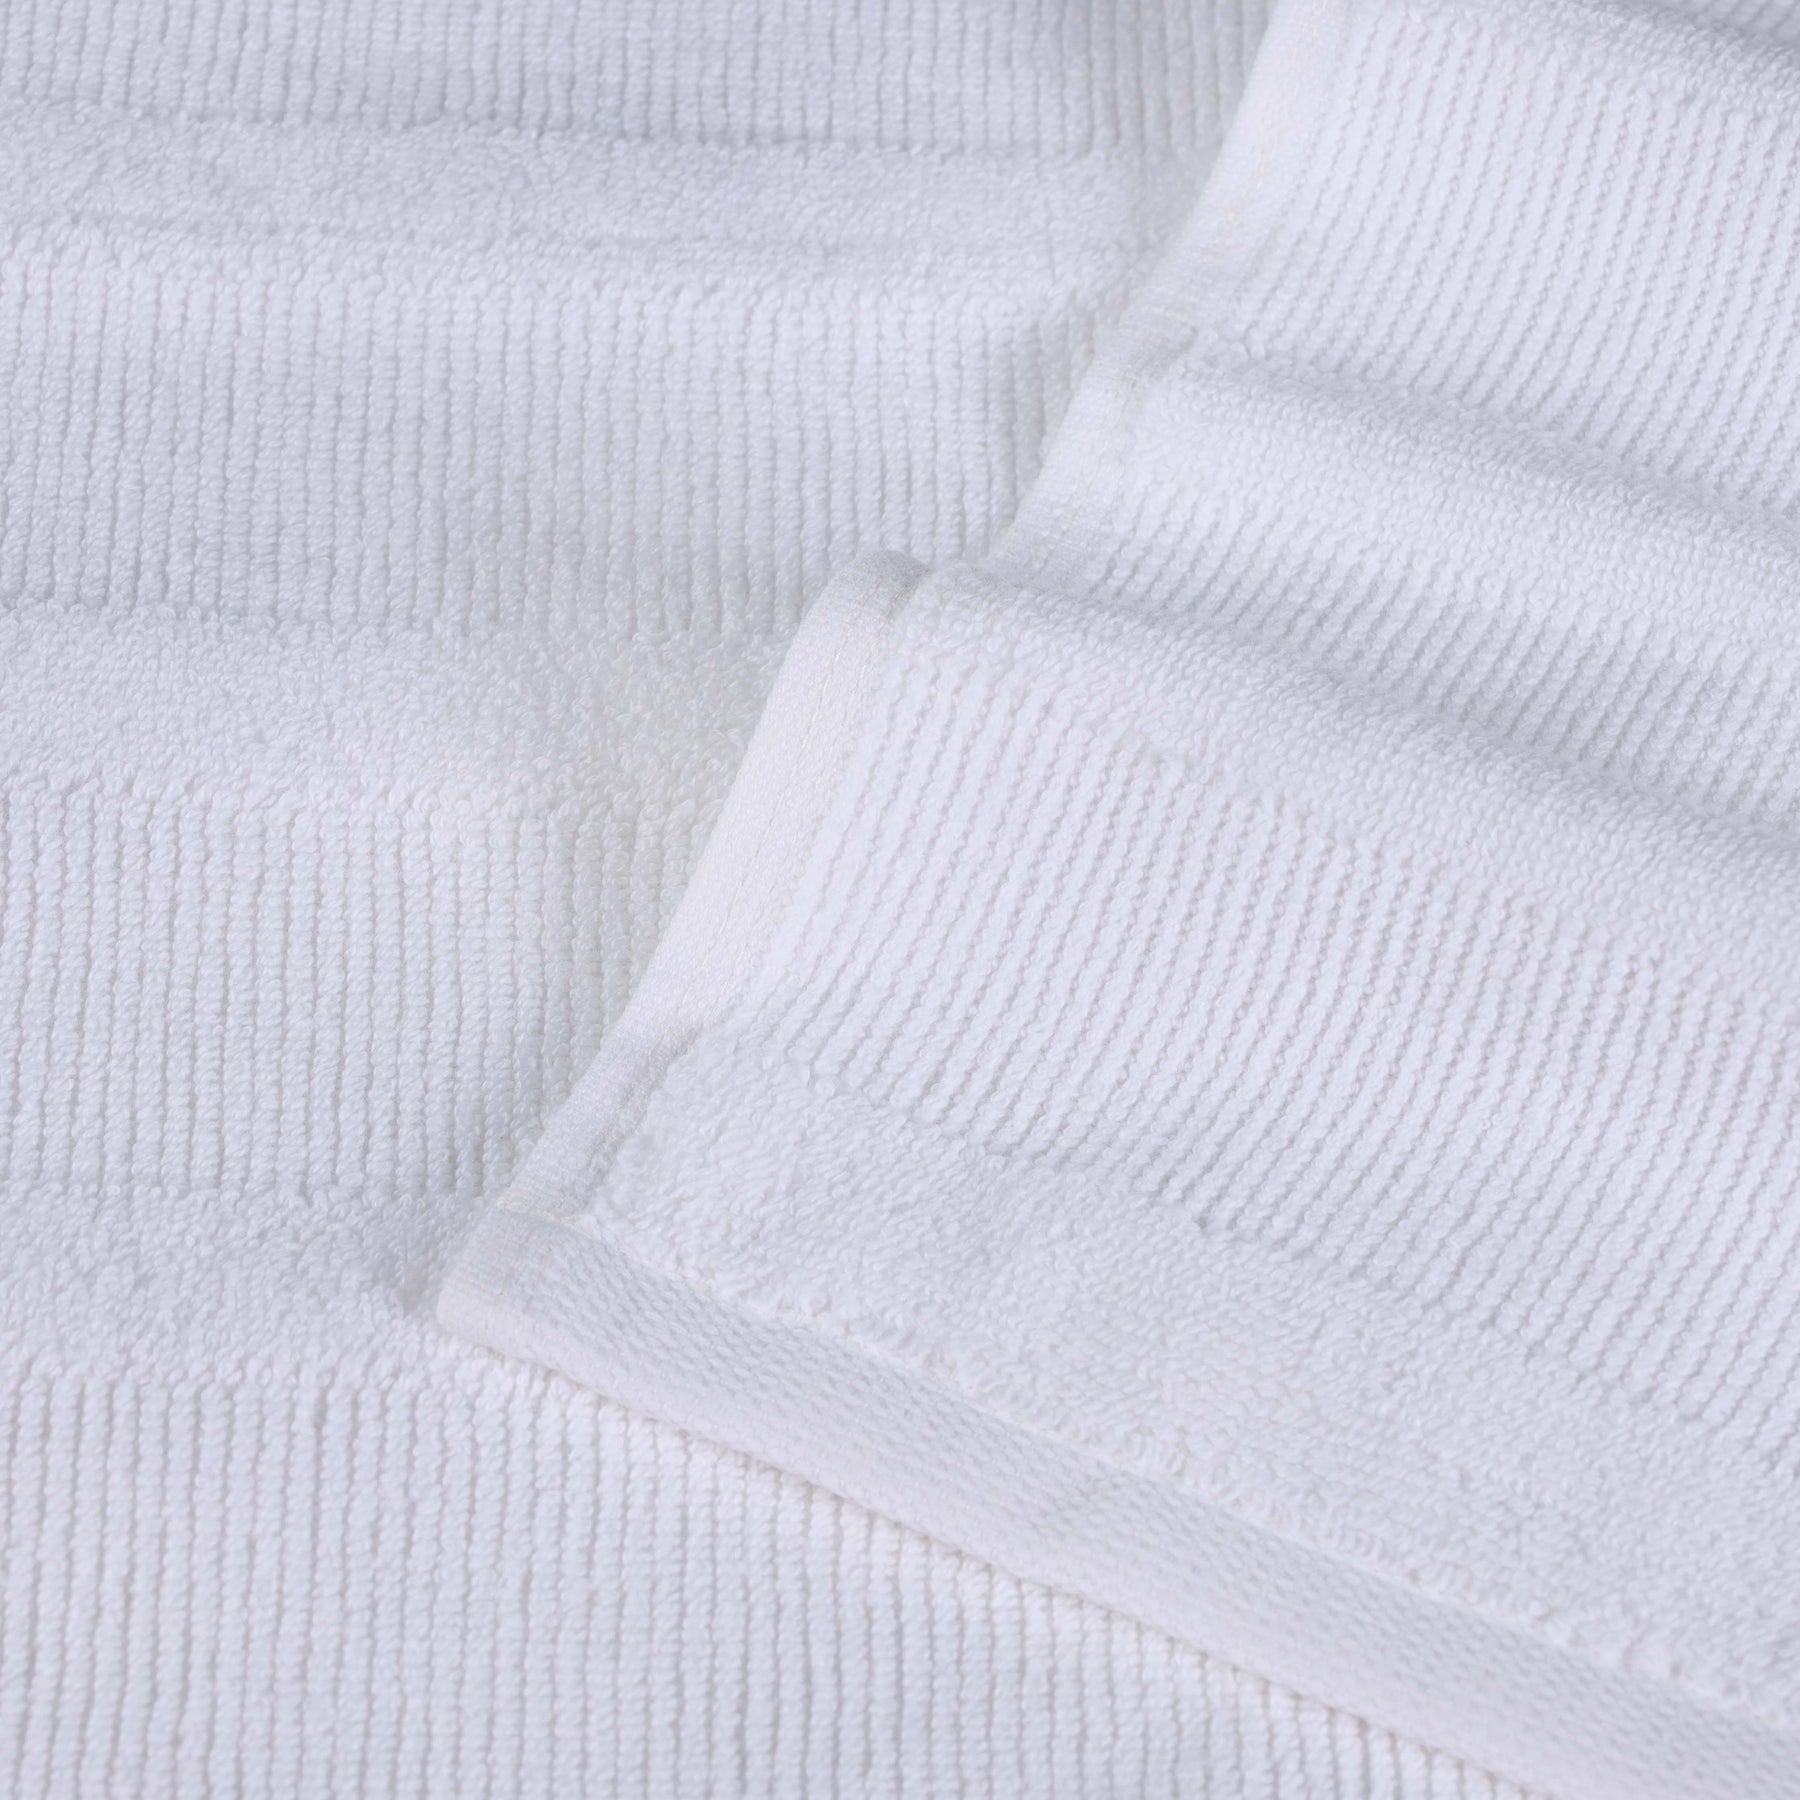 Roma Cotton Ribbed Textured Soft Highly Absorbent Bath Towel - White